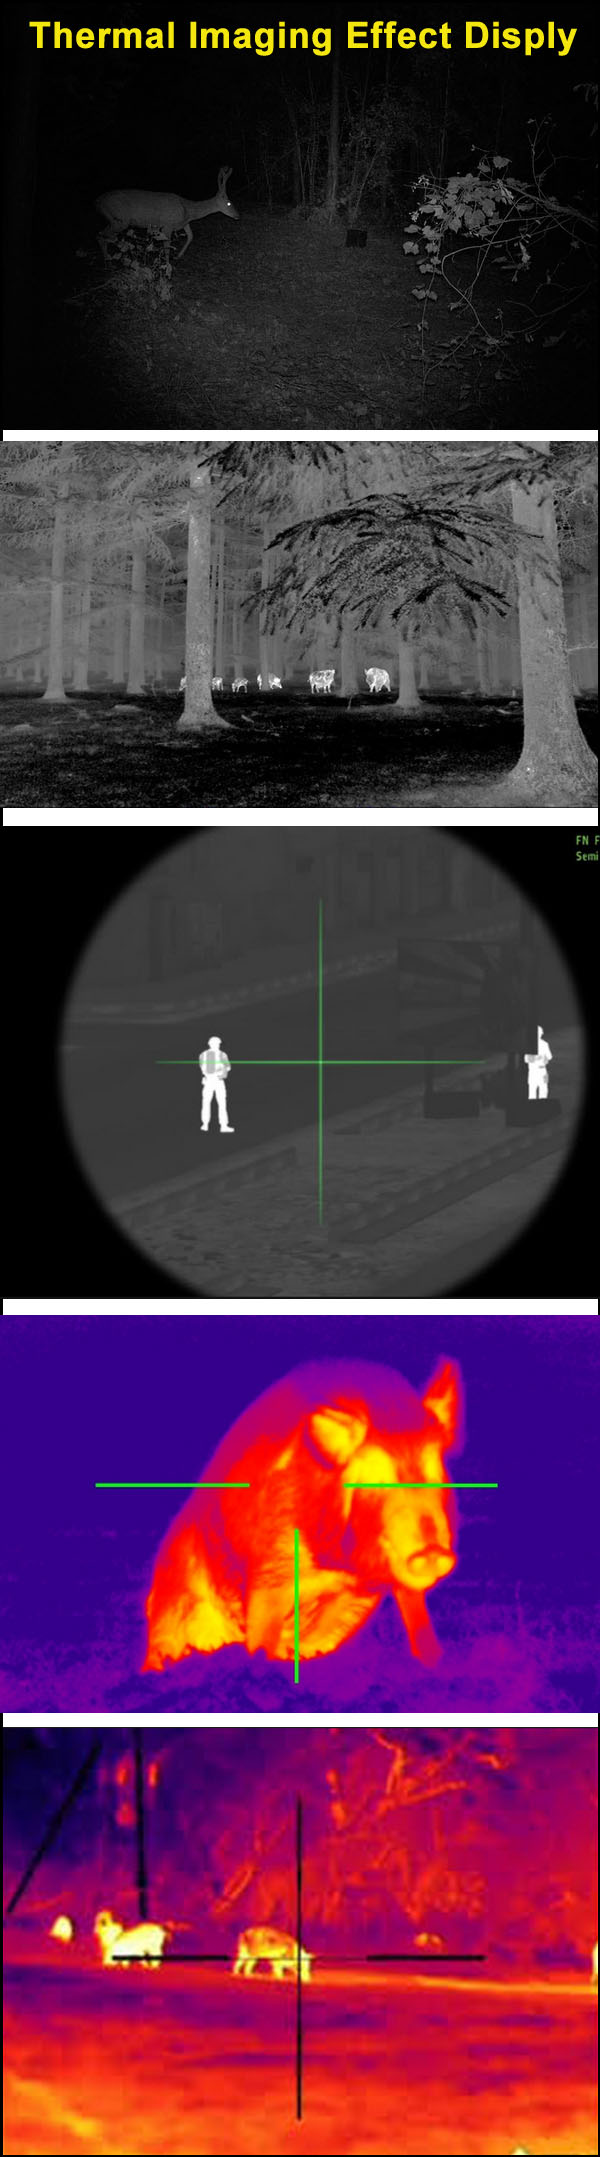 function of thermal riflescope